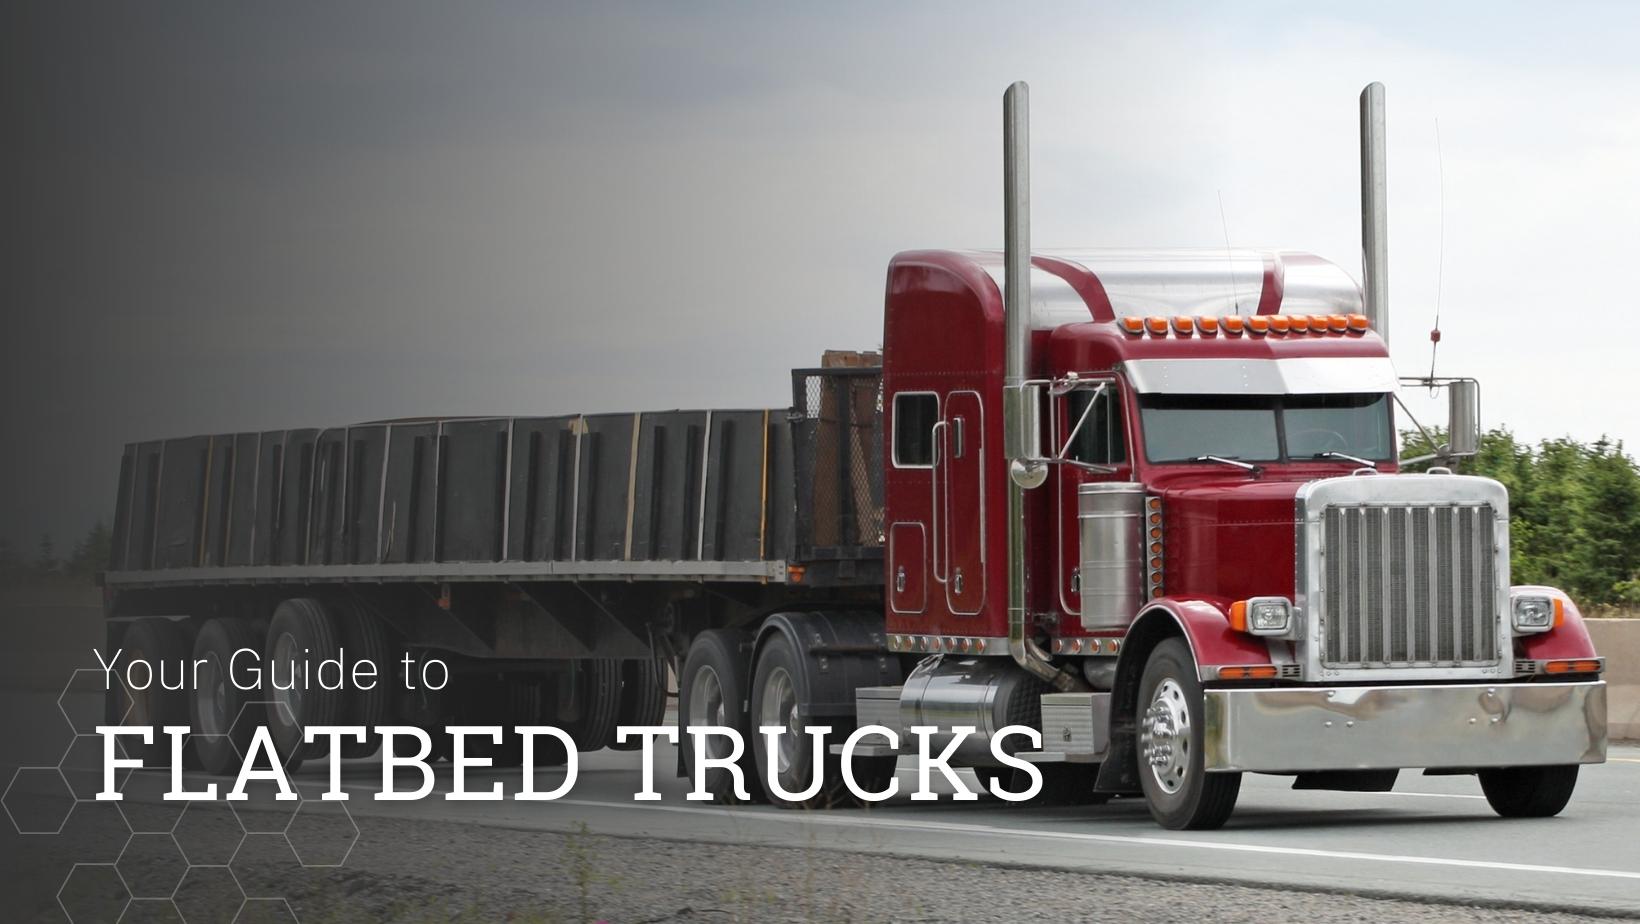 A red flatbed truck on the road and text that reads "Your Guide to Flatbed Trucks"